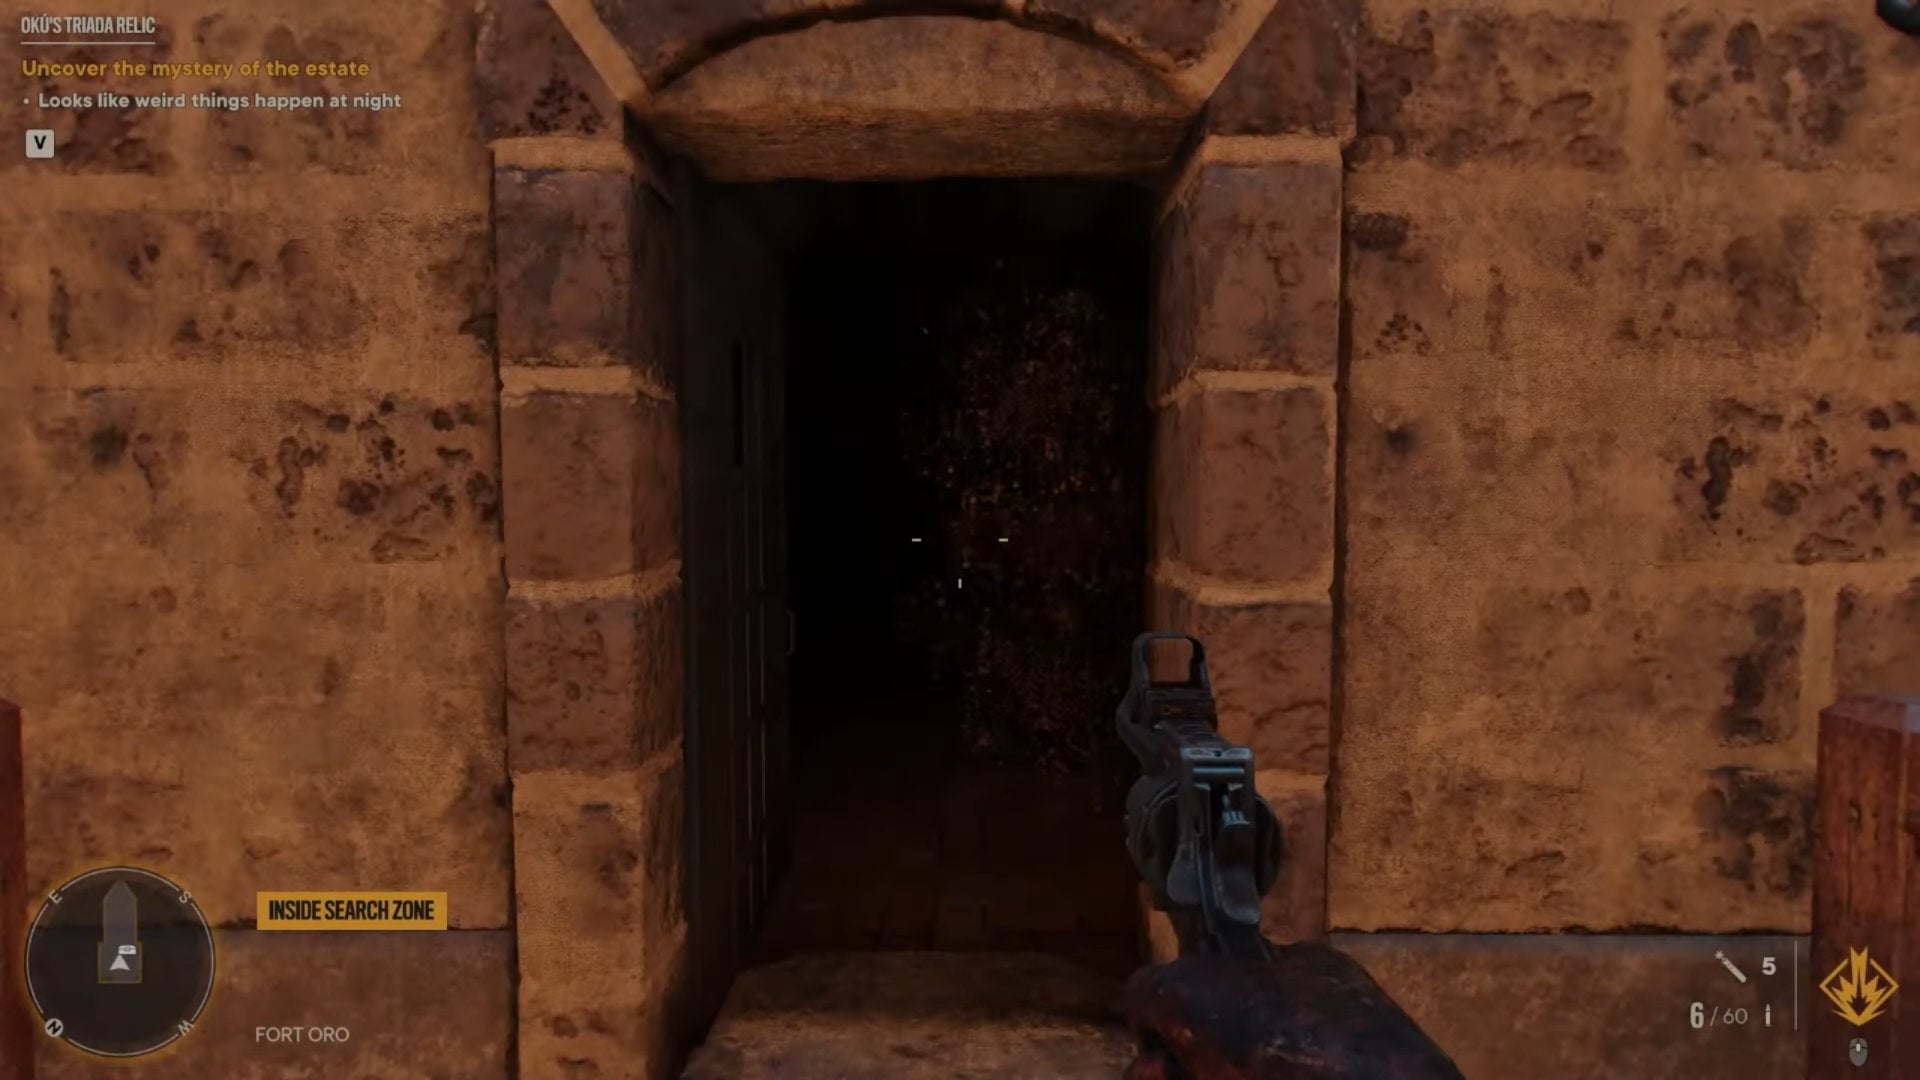 A screenshot of the open door to Fort Oro, home of Oku's Triada Relic in Far Cry 6.